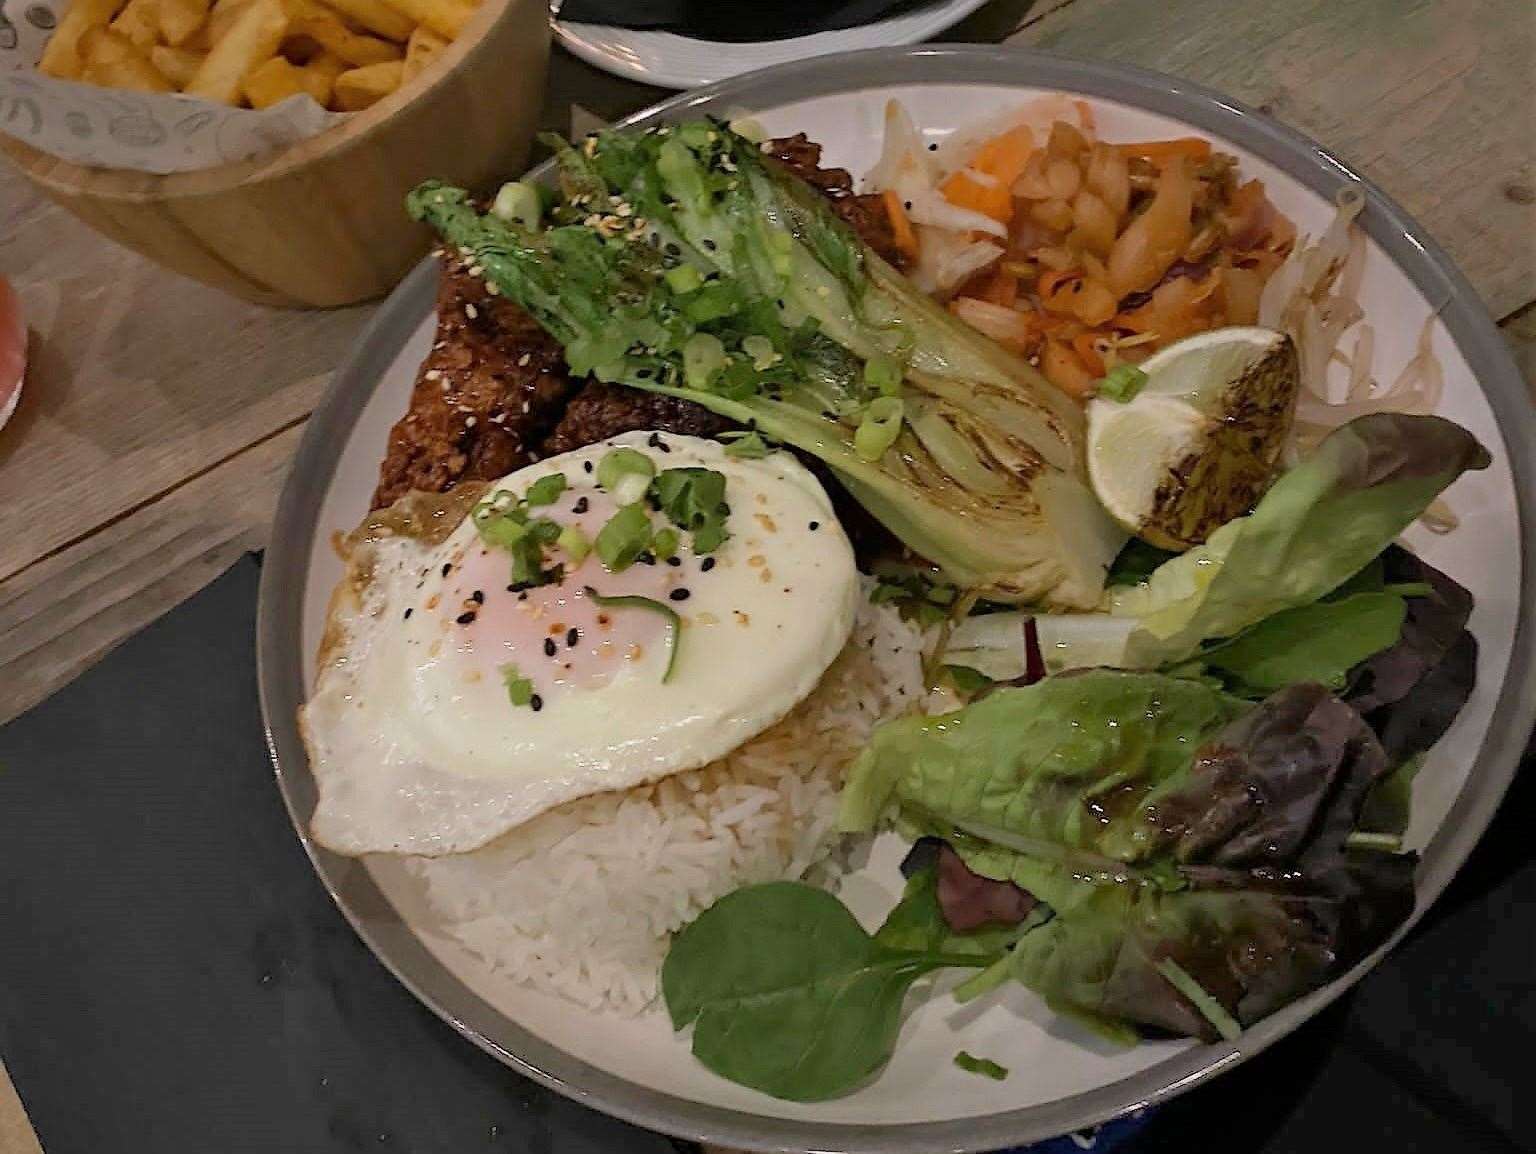 The Korean fried chicken bibimbap at The Bao Baron in Folkestone was another popular dish